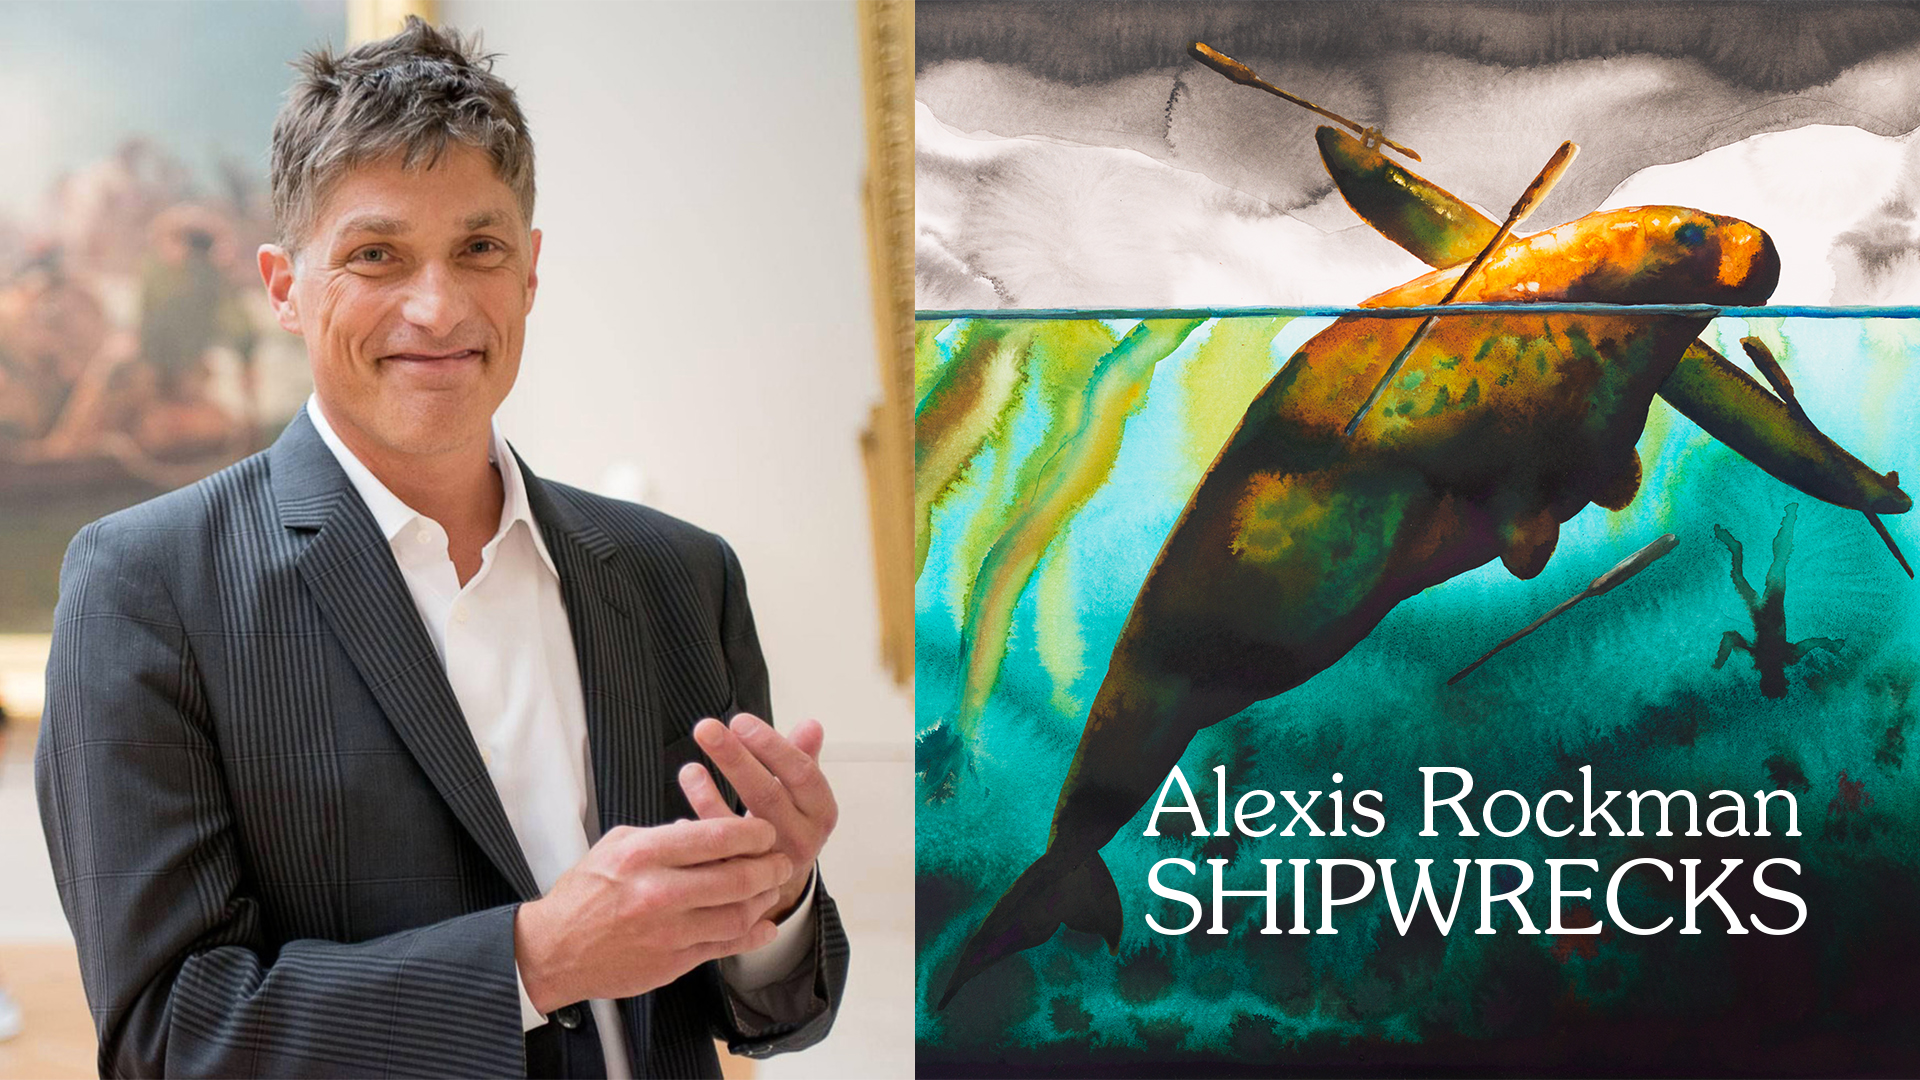 Composite image of Alexis Rockman and a painting from his Shipwrecks series featuring a manatee, wood debris, and a drowning human